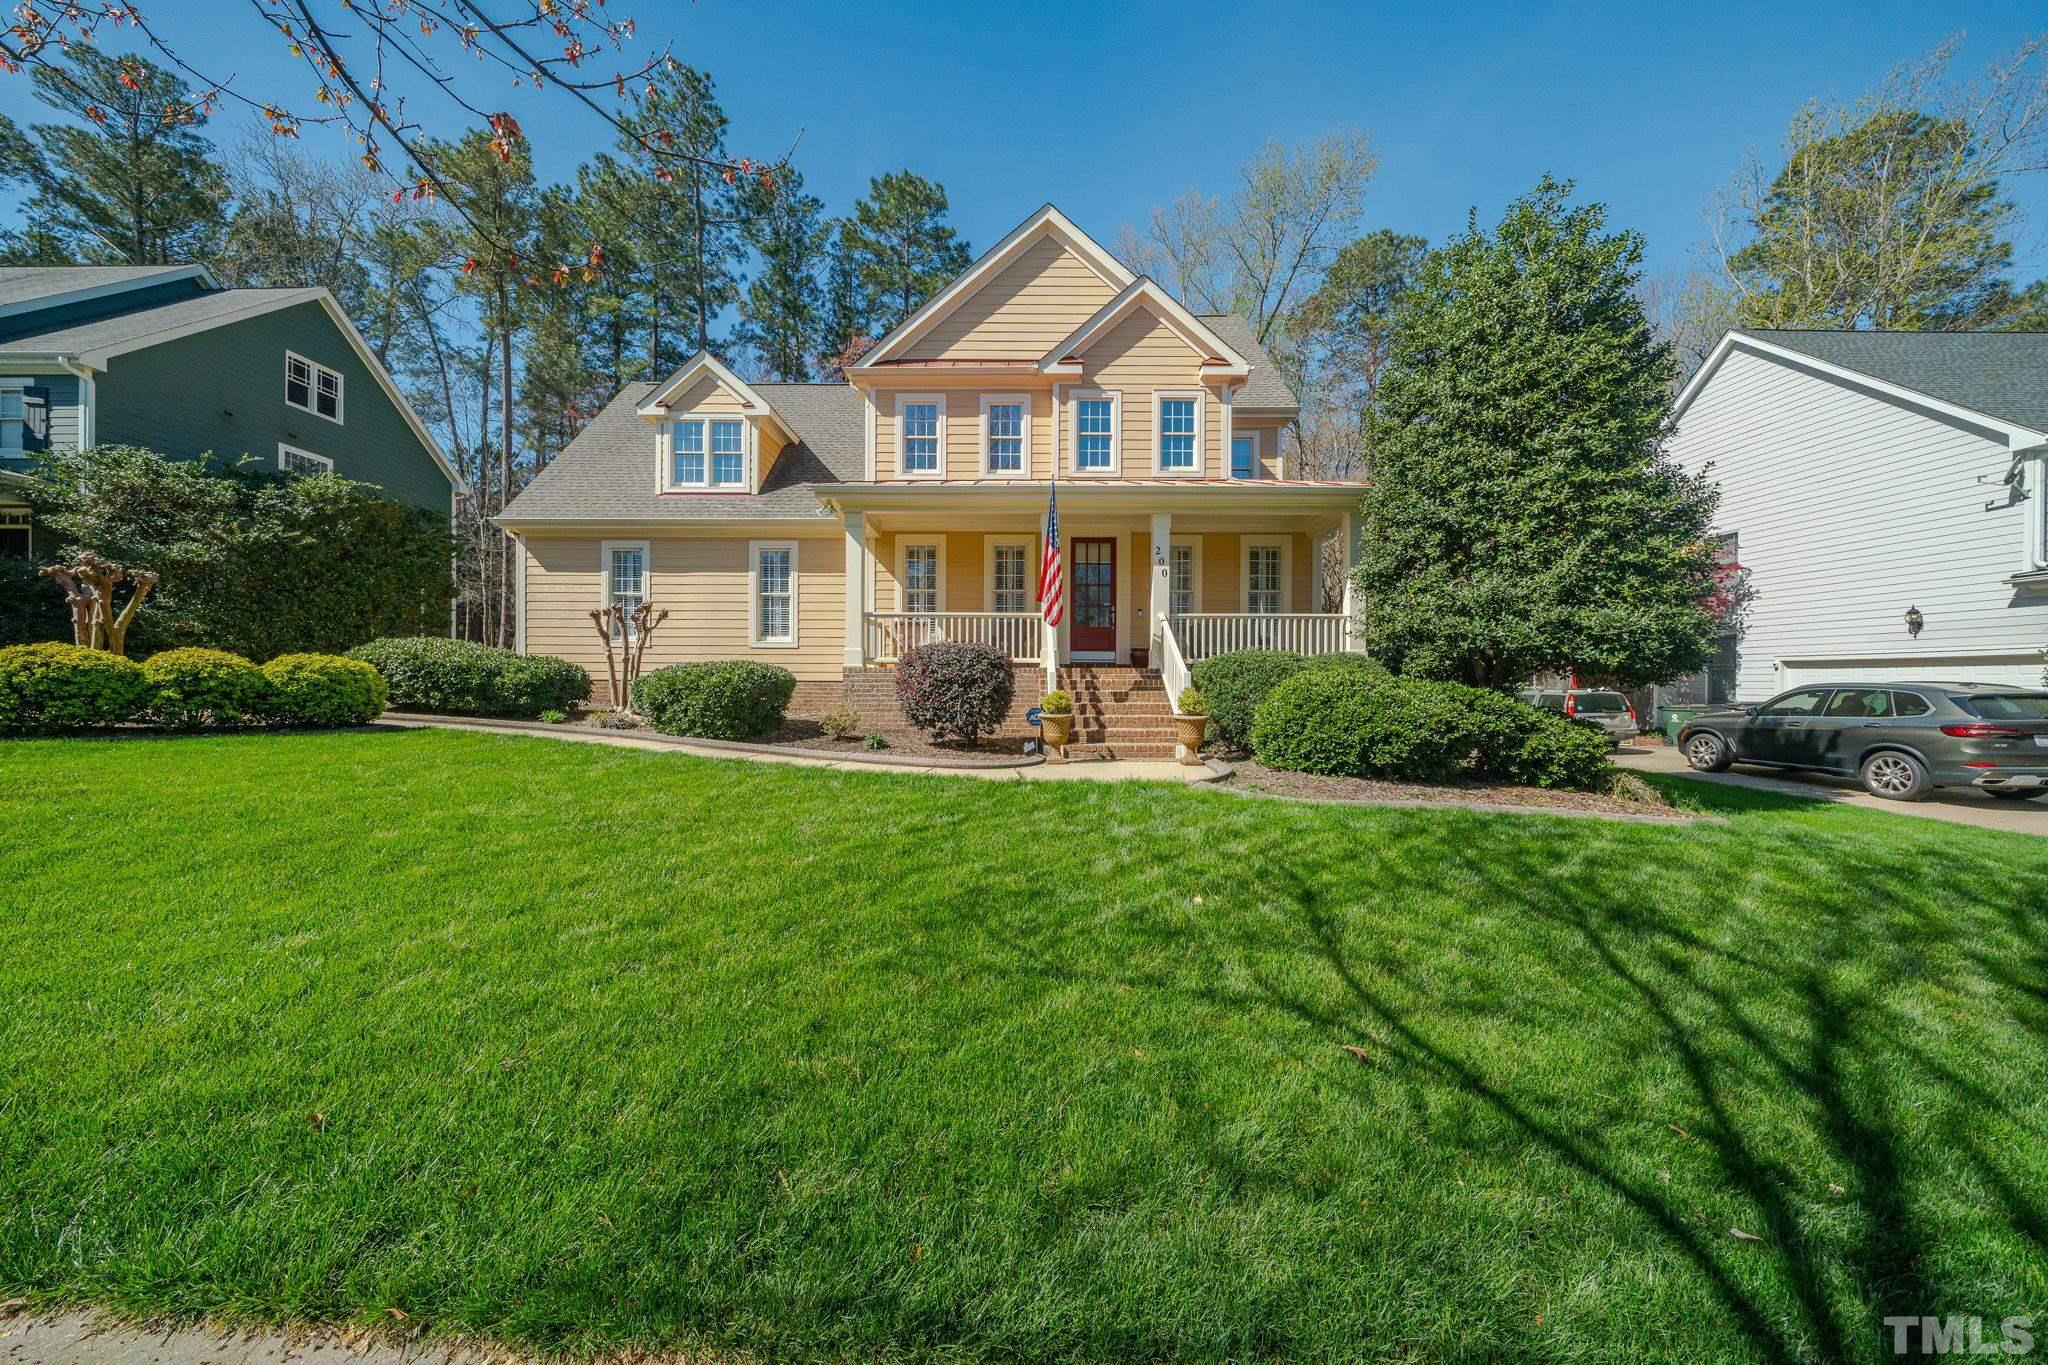 200 Middlecrest Way, Holly Springs, NC 27540